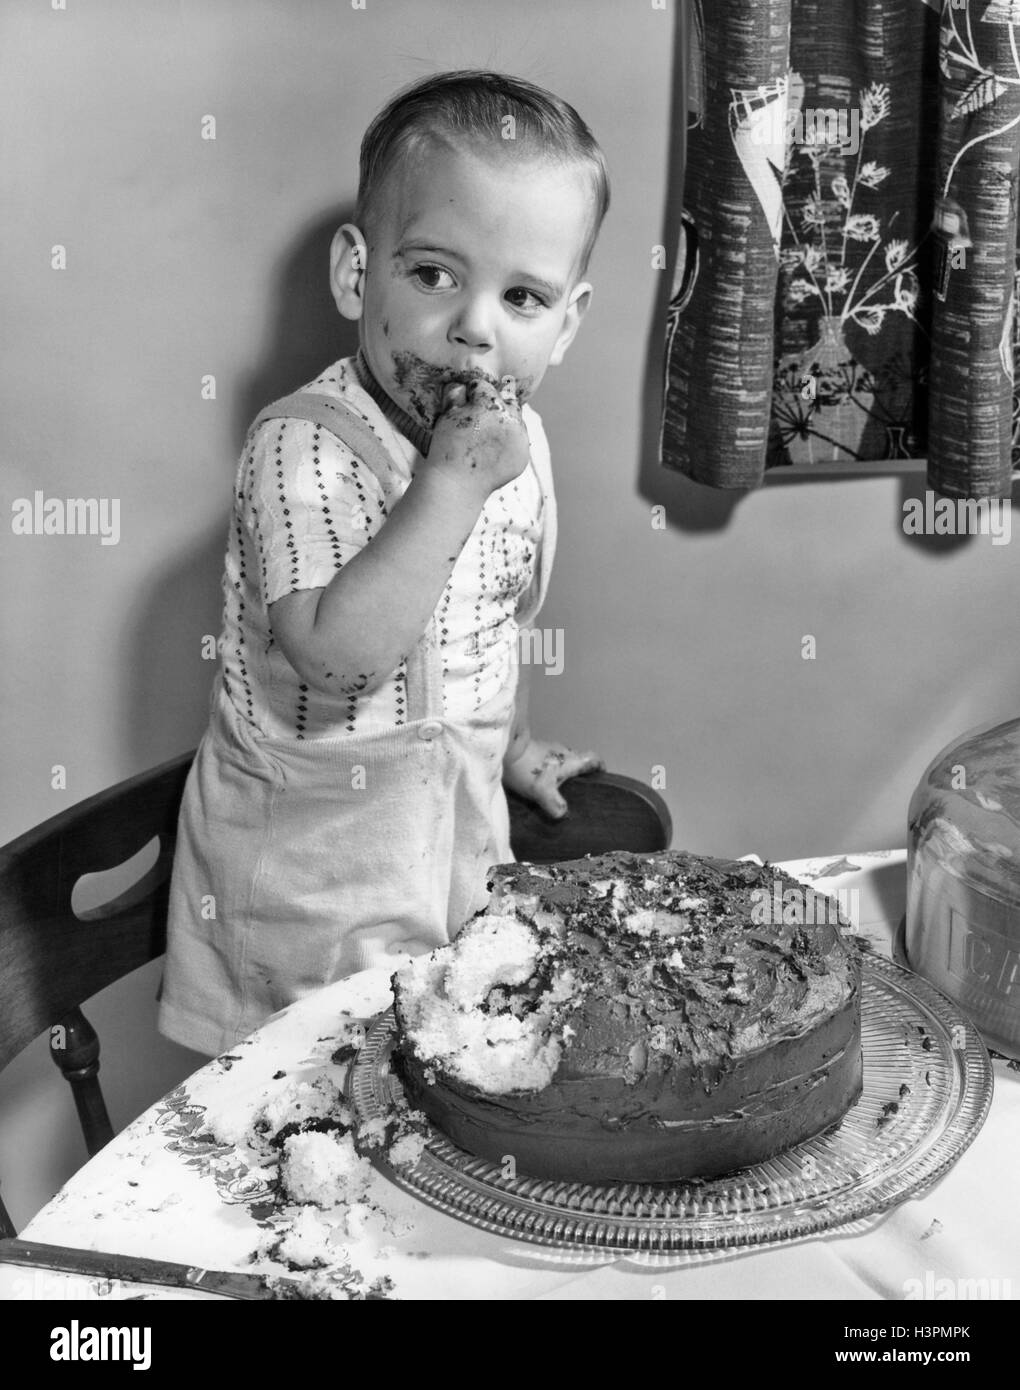 1950s LITTLE BOY TODDLER STANDING ON CHAIR BY CHOCOLATE CAKE WITH FINGERS IN MOUTH AND ICING ALL OVER HIS FACE Stock Photo